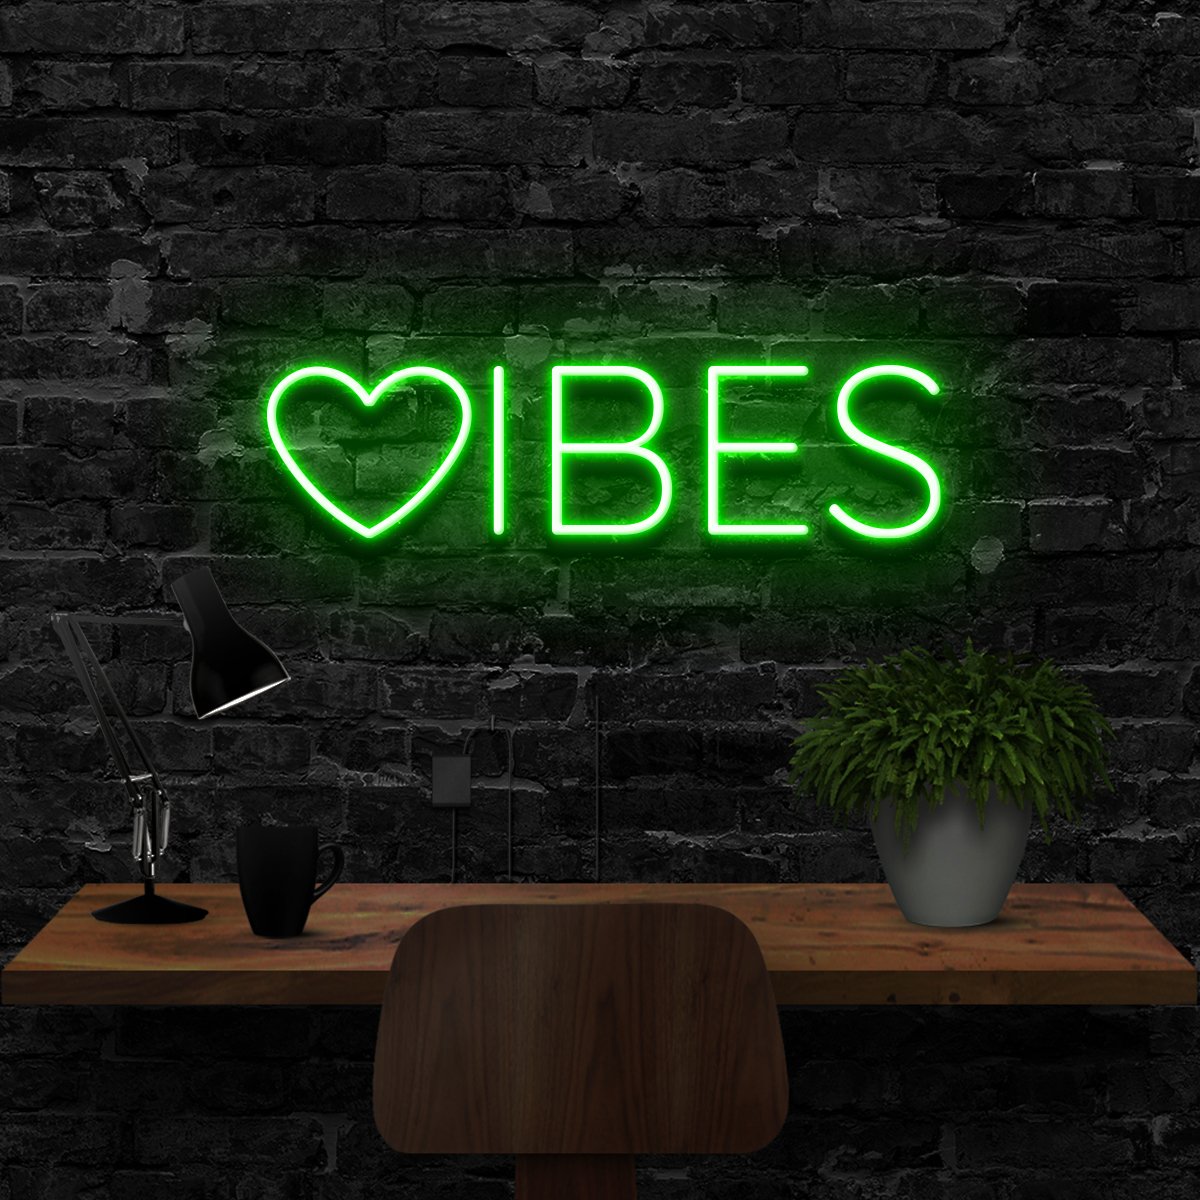 "VIBES" Neon Sign 40cm (1.3ft) / Green / LED Neon by Neon Icons